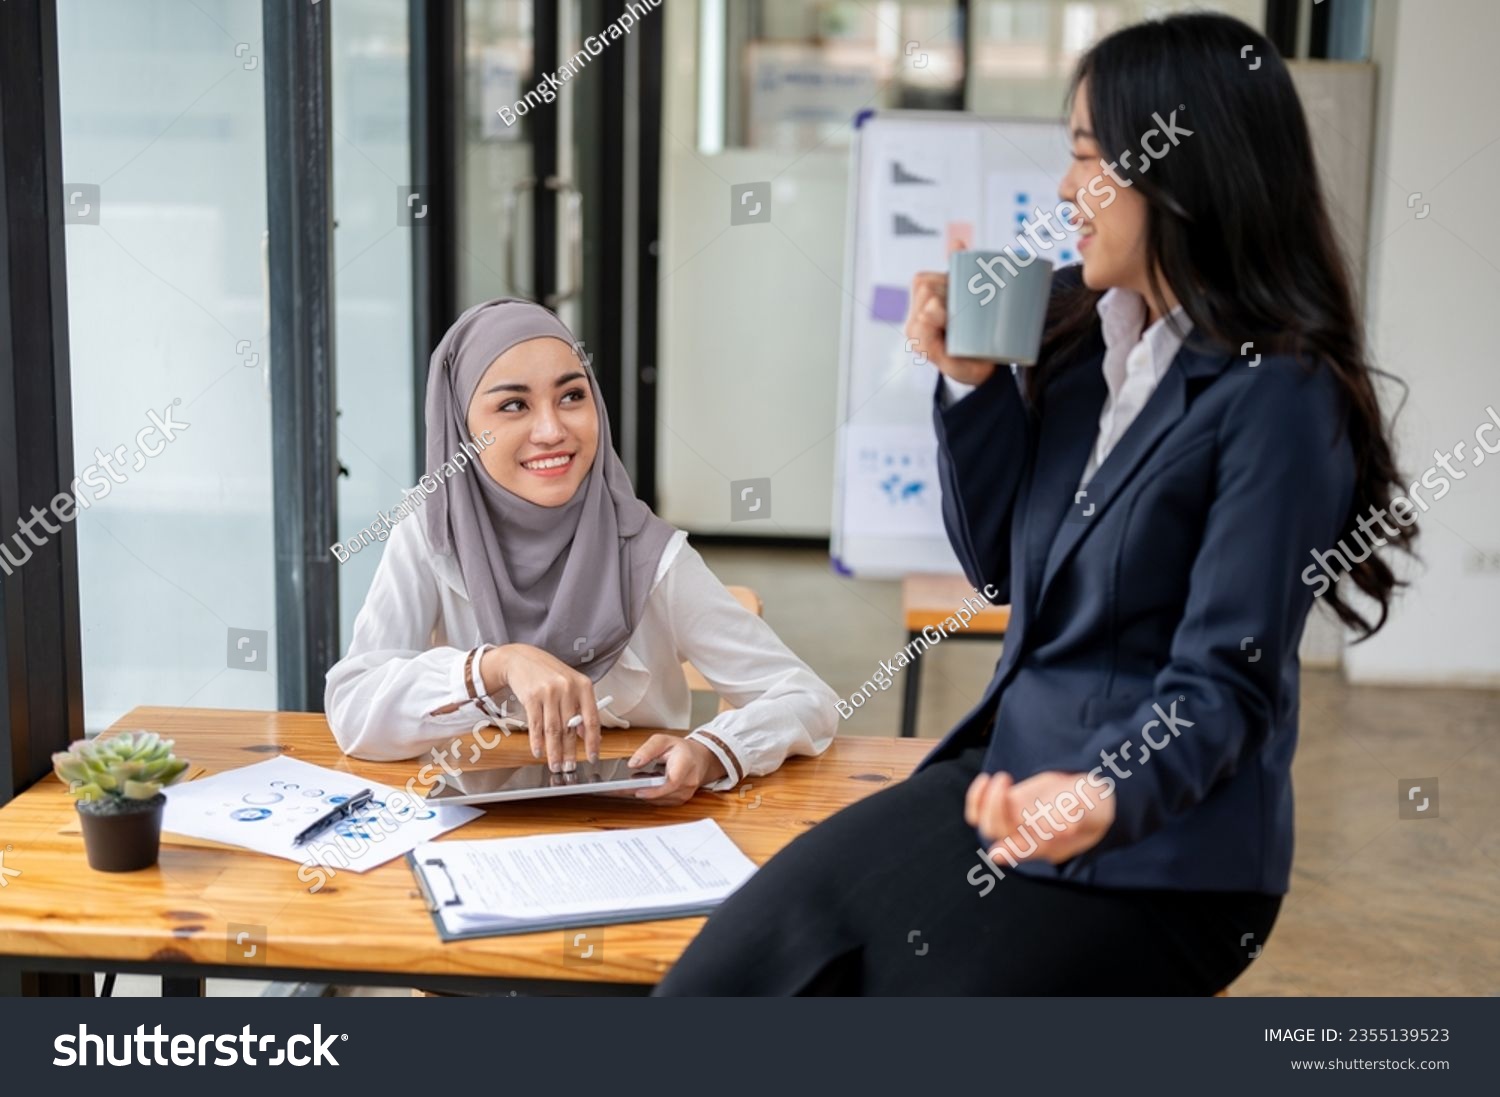 An attractive and smiling Asian Muslim female office worker wearing a hijab enjoys chatting with her colleague during a coffee break in the office. #2355139523